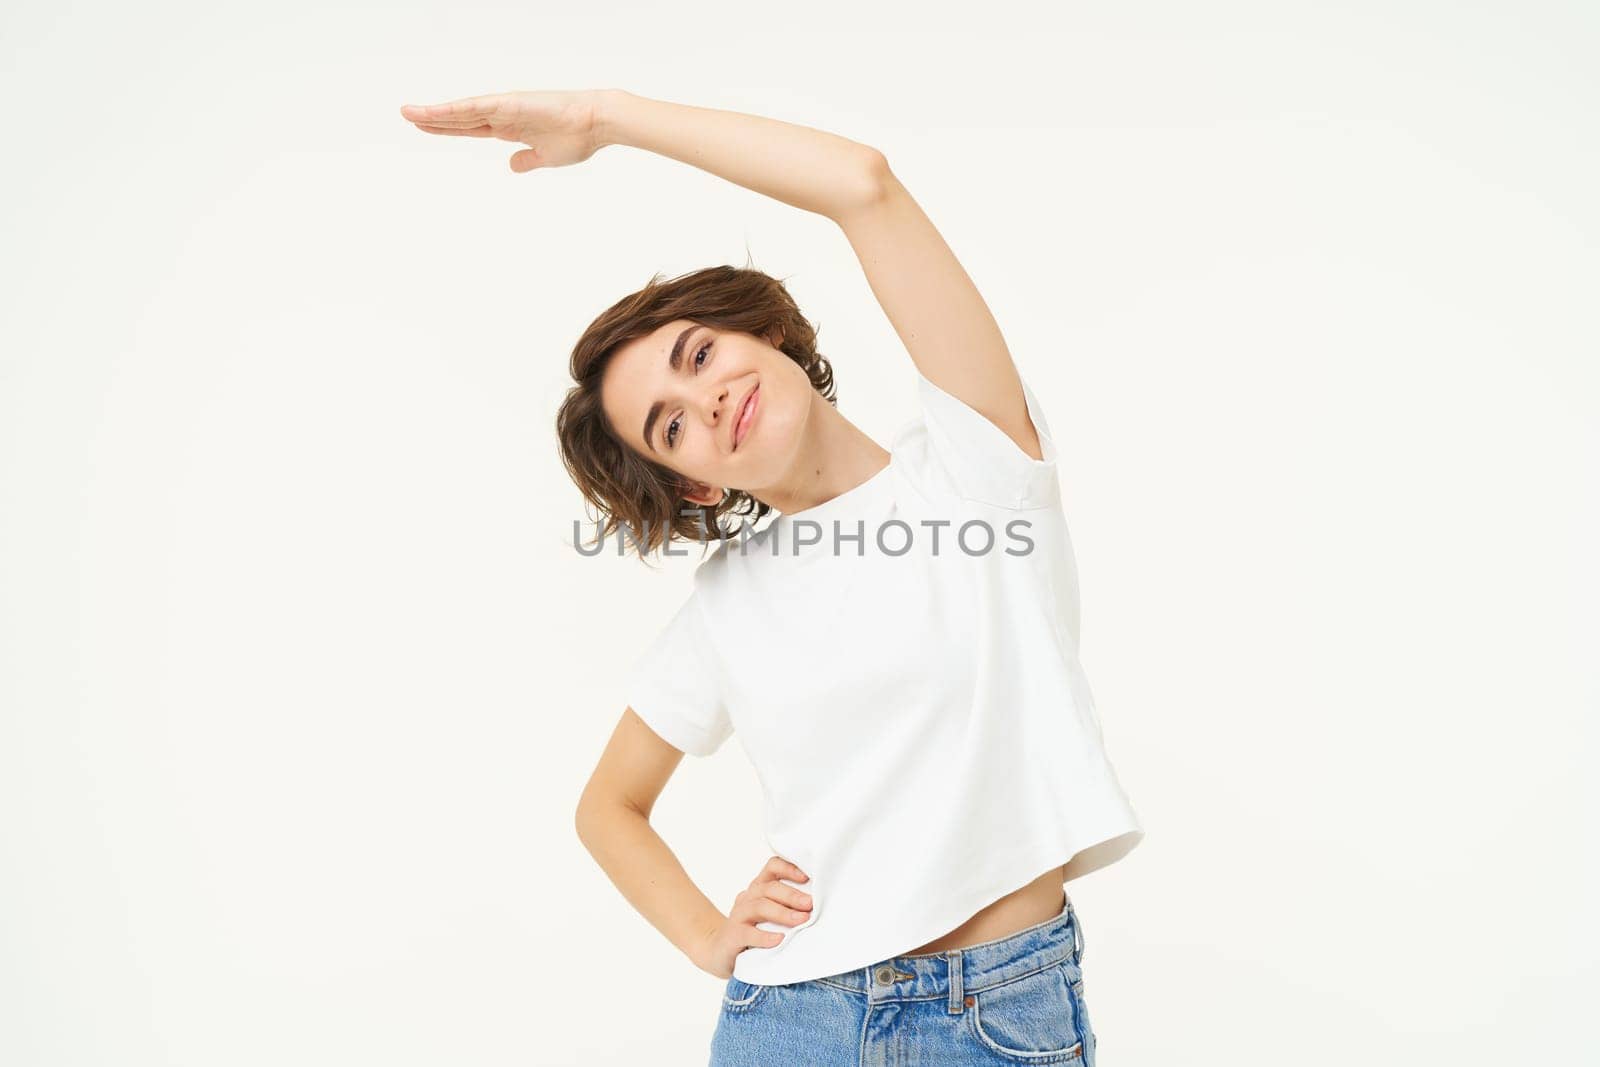 Portrait of woman doing exercise, fitness movements, bending arm sideways and stretching body, standing over white background. Copy space